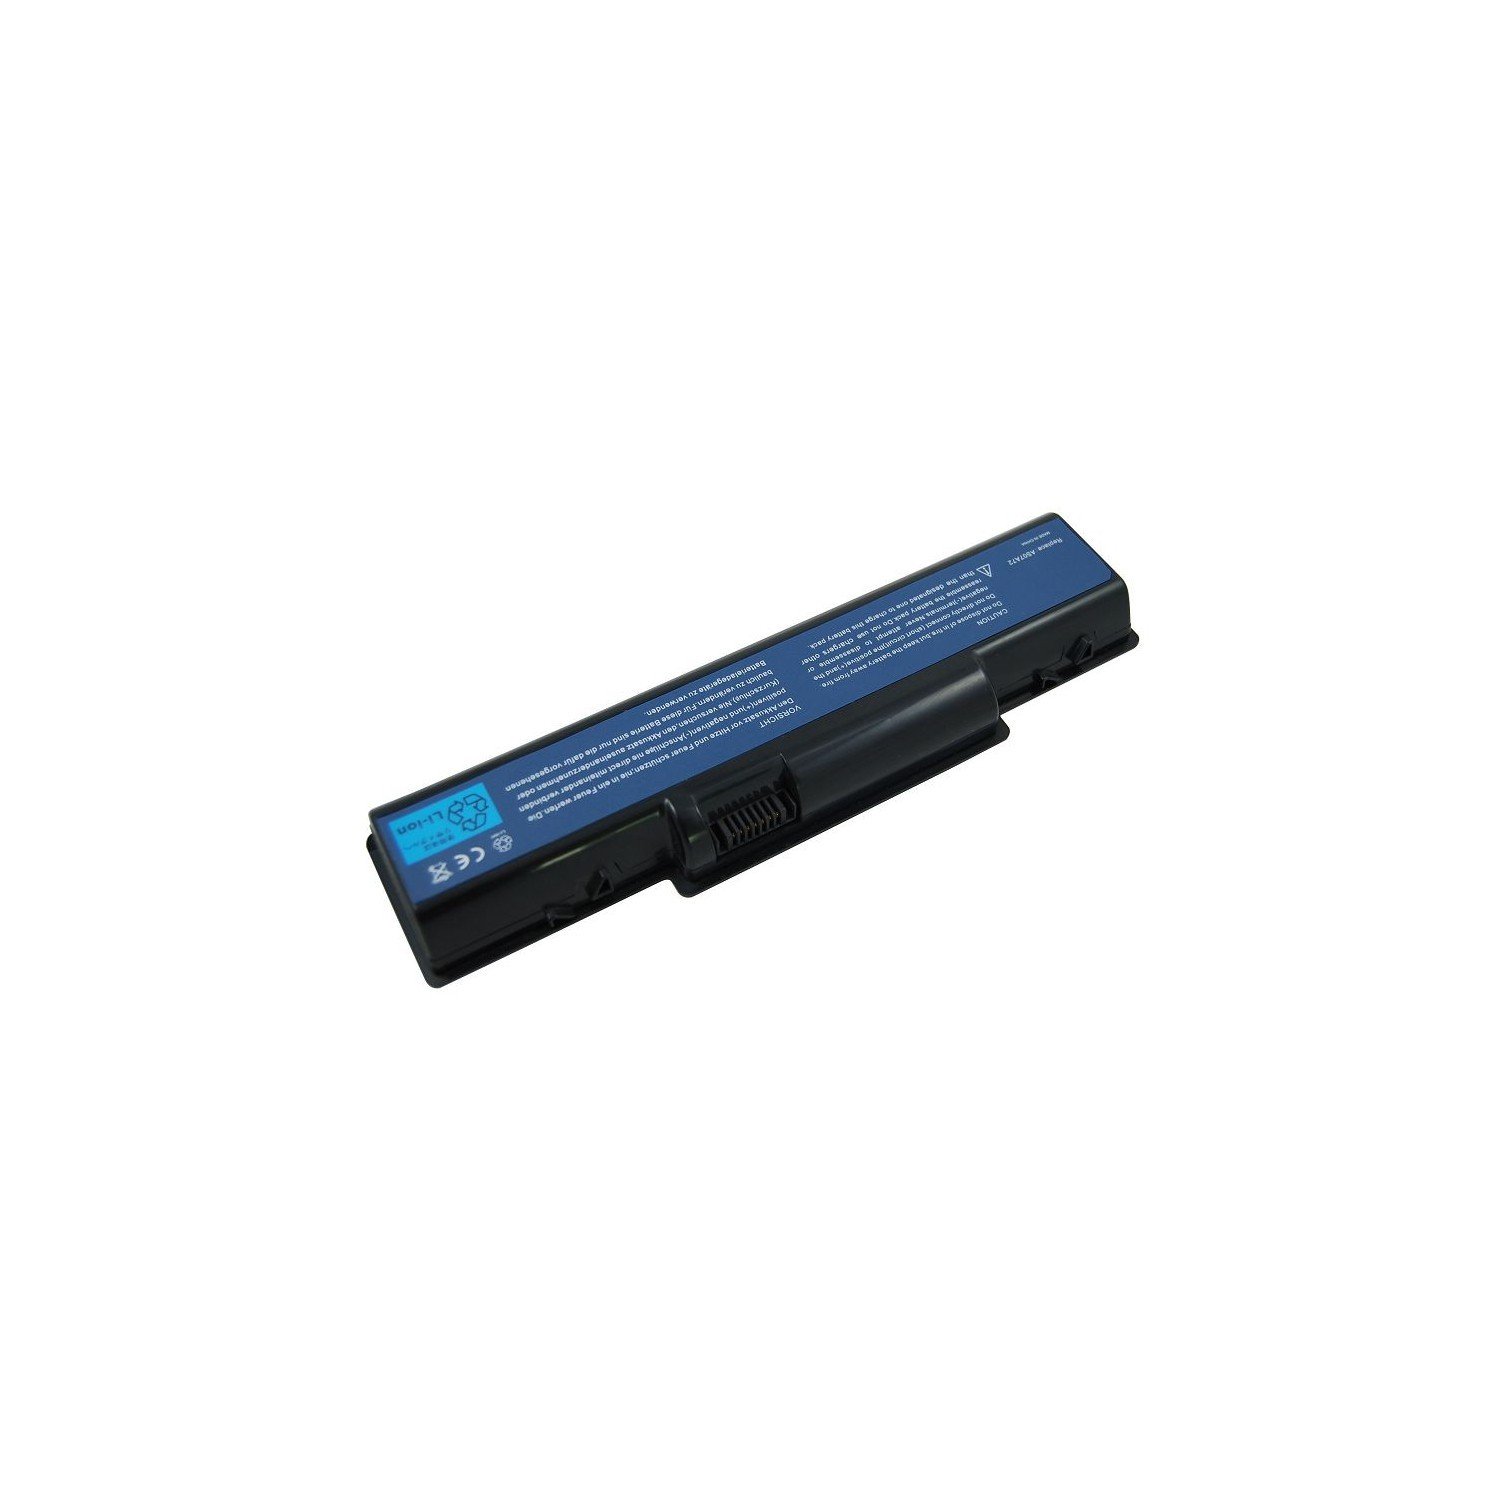 Battery for Acer 2430, 2930, 3732z, 4220, 4310, 4310G ( AS07A51, AS07A71 )